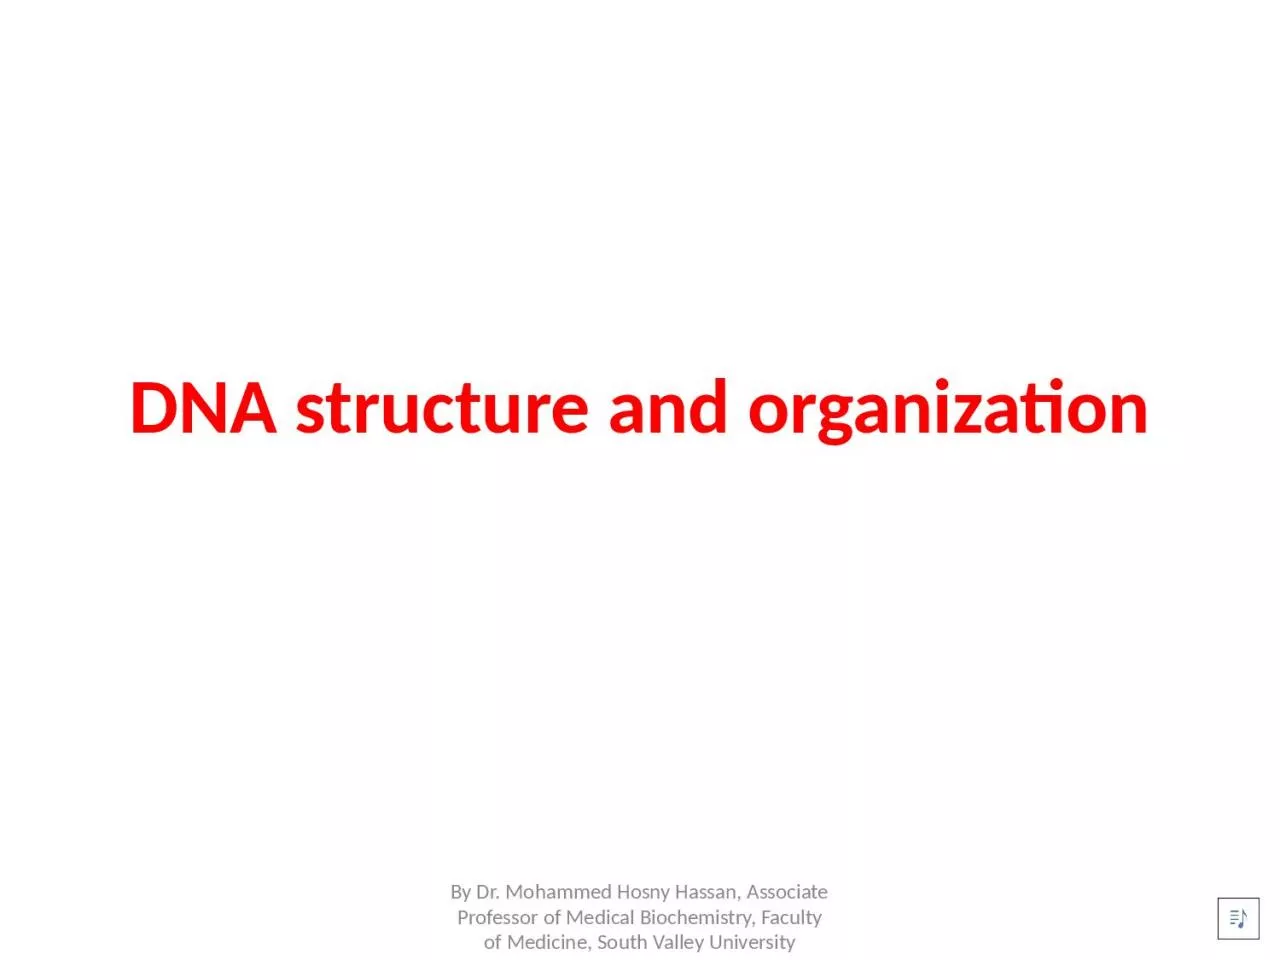 DNA structure and organization